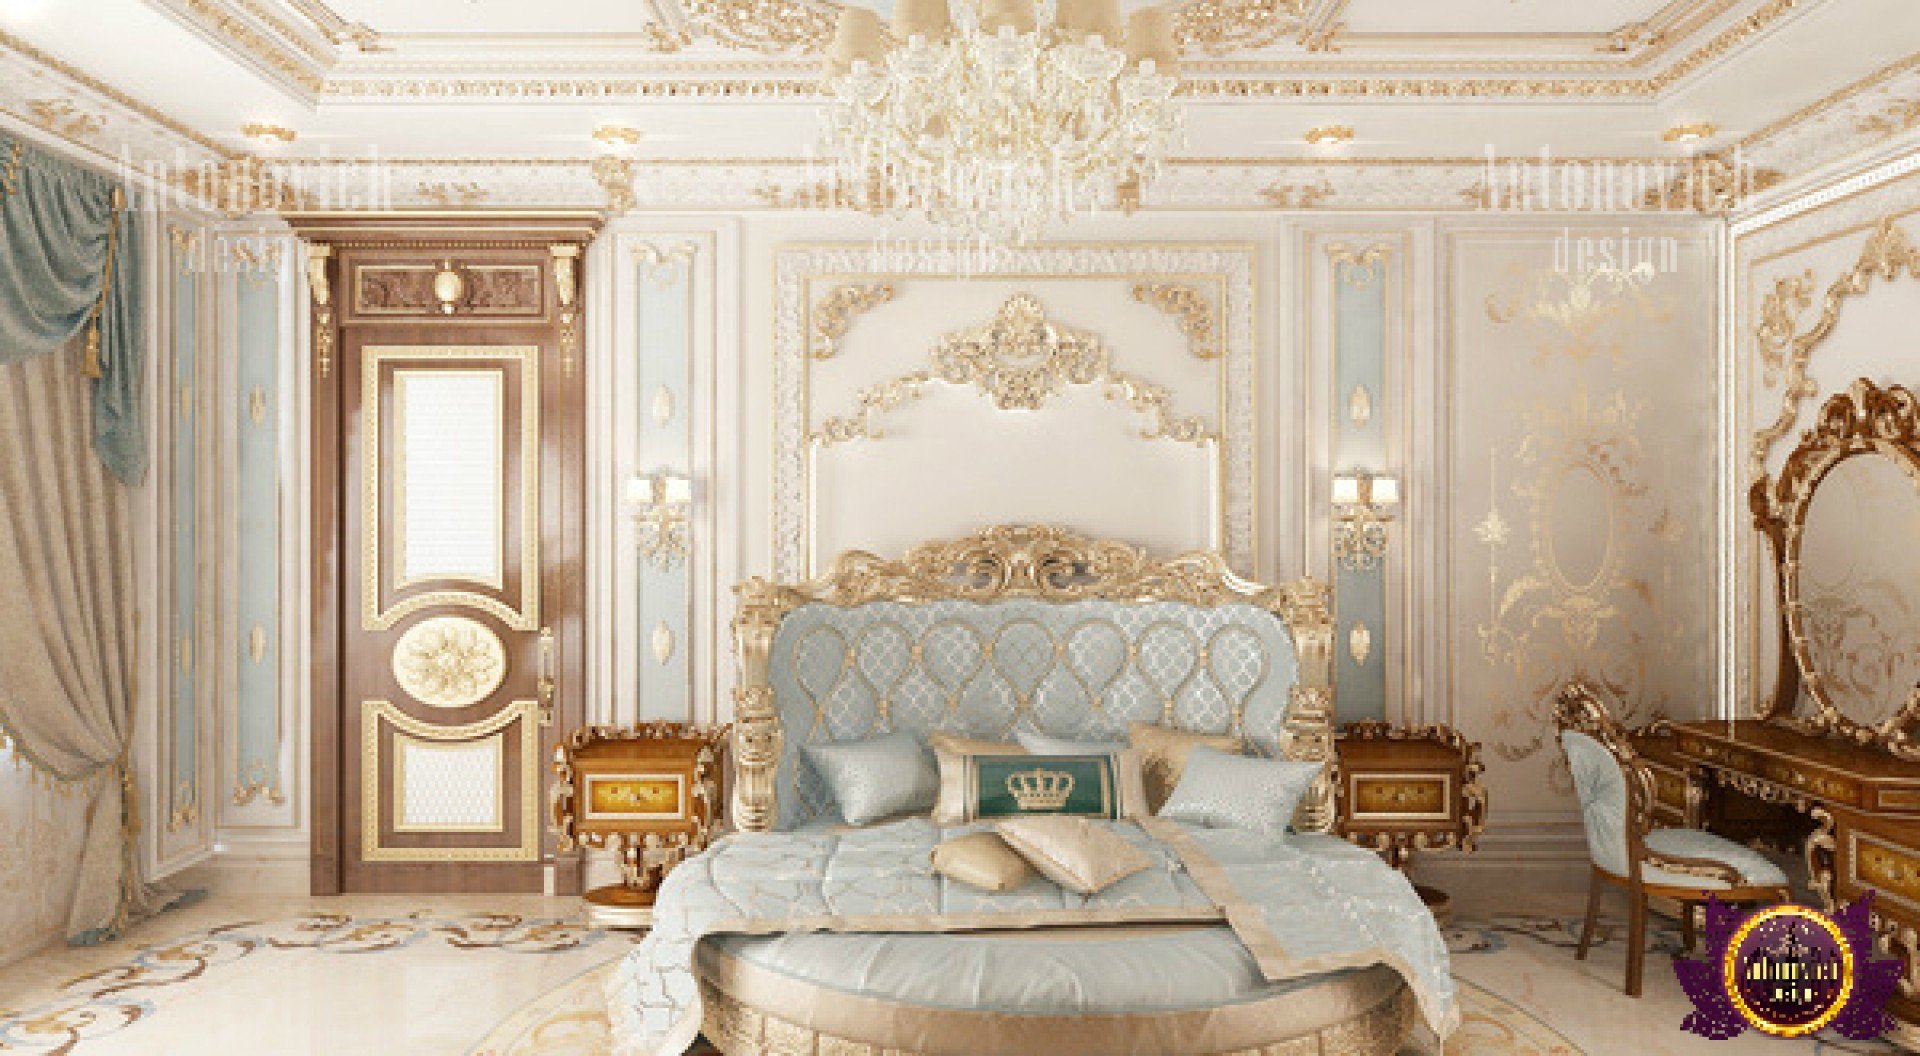 Spacious and airy bedroom design in UAE with a touch of glamour